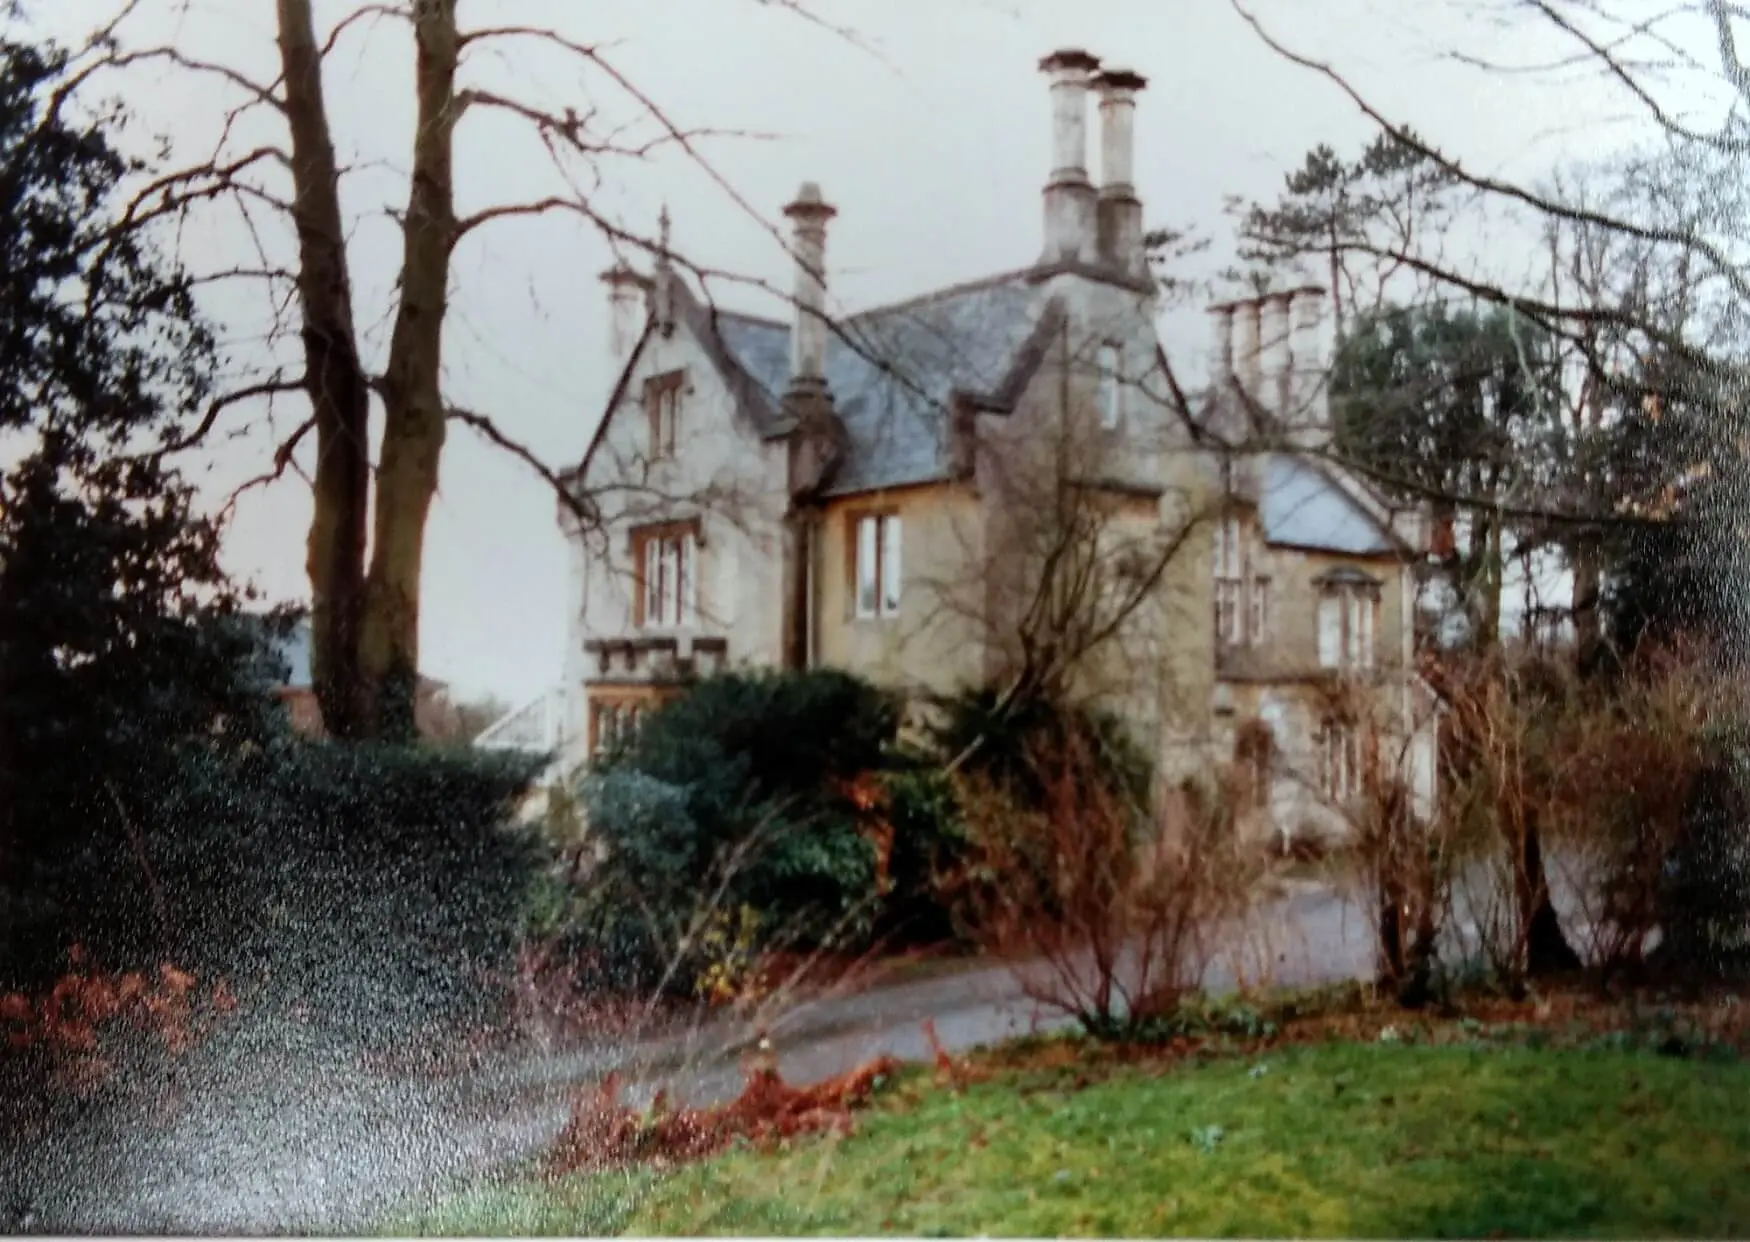 1 - BC8811229 Bath City Council Planning Department. Conservation Grant file for The Old Vicarage, Church Road, Combe Down, 15 Feb 1983-13 Sep 1983